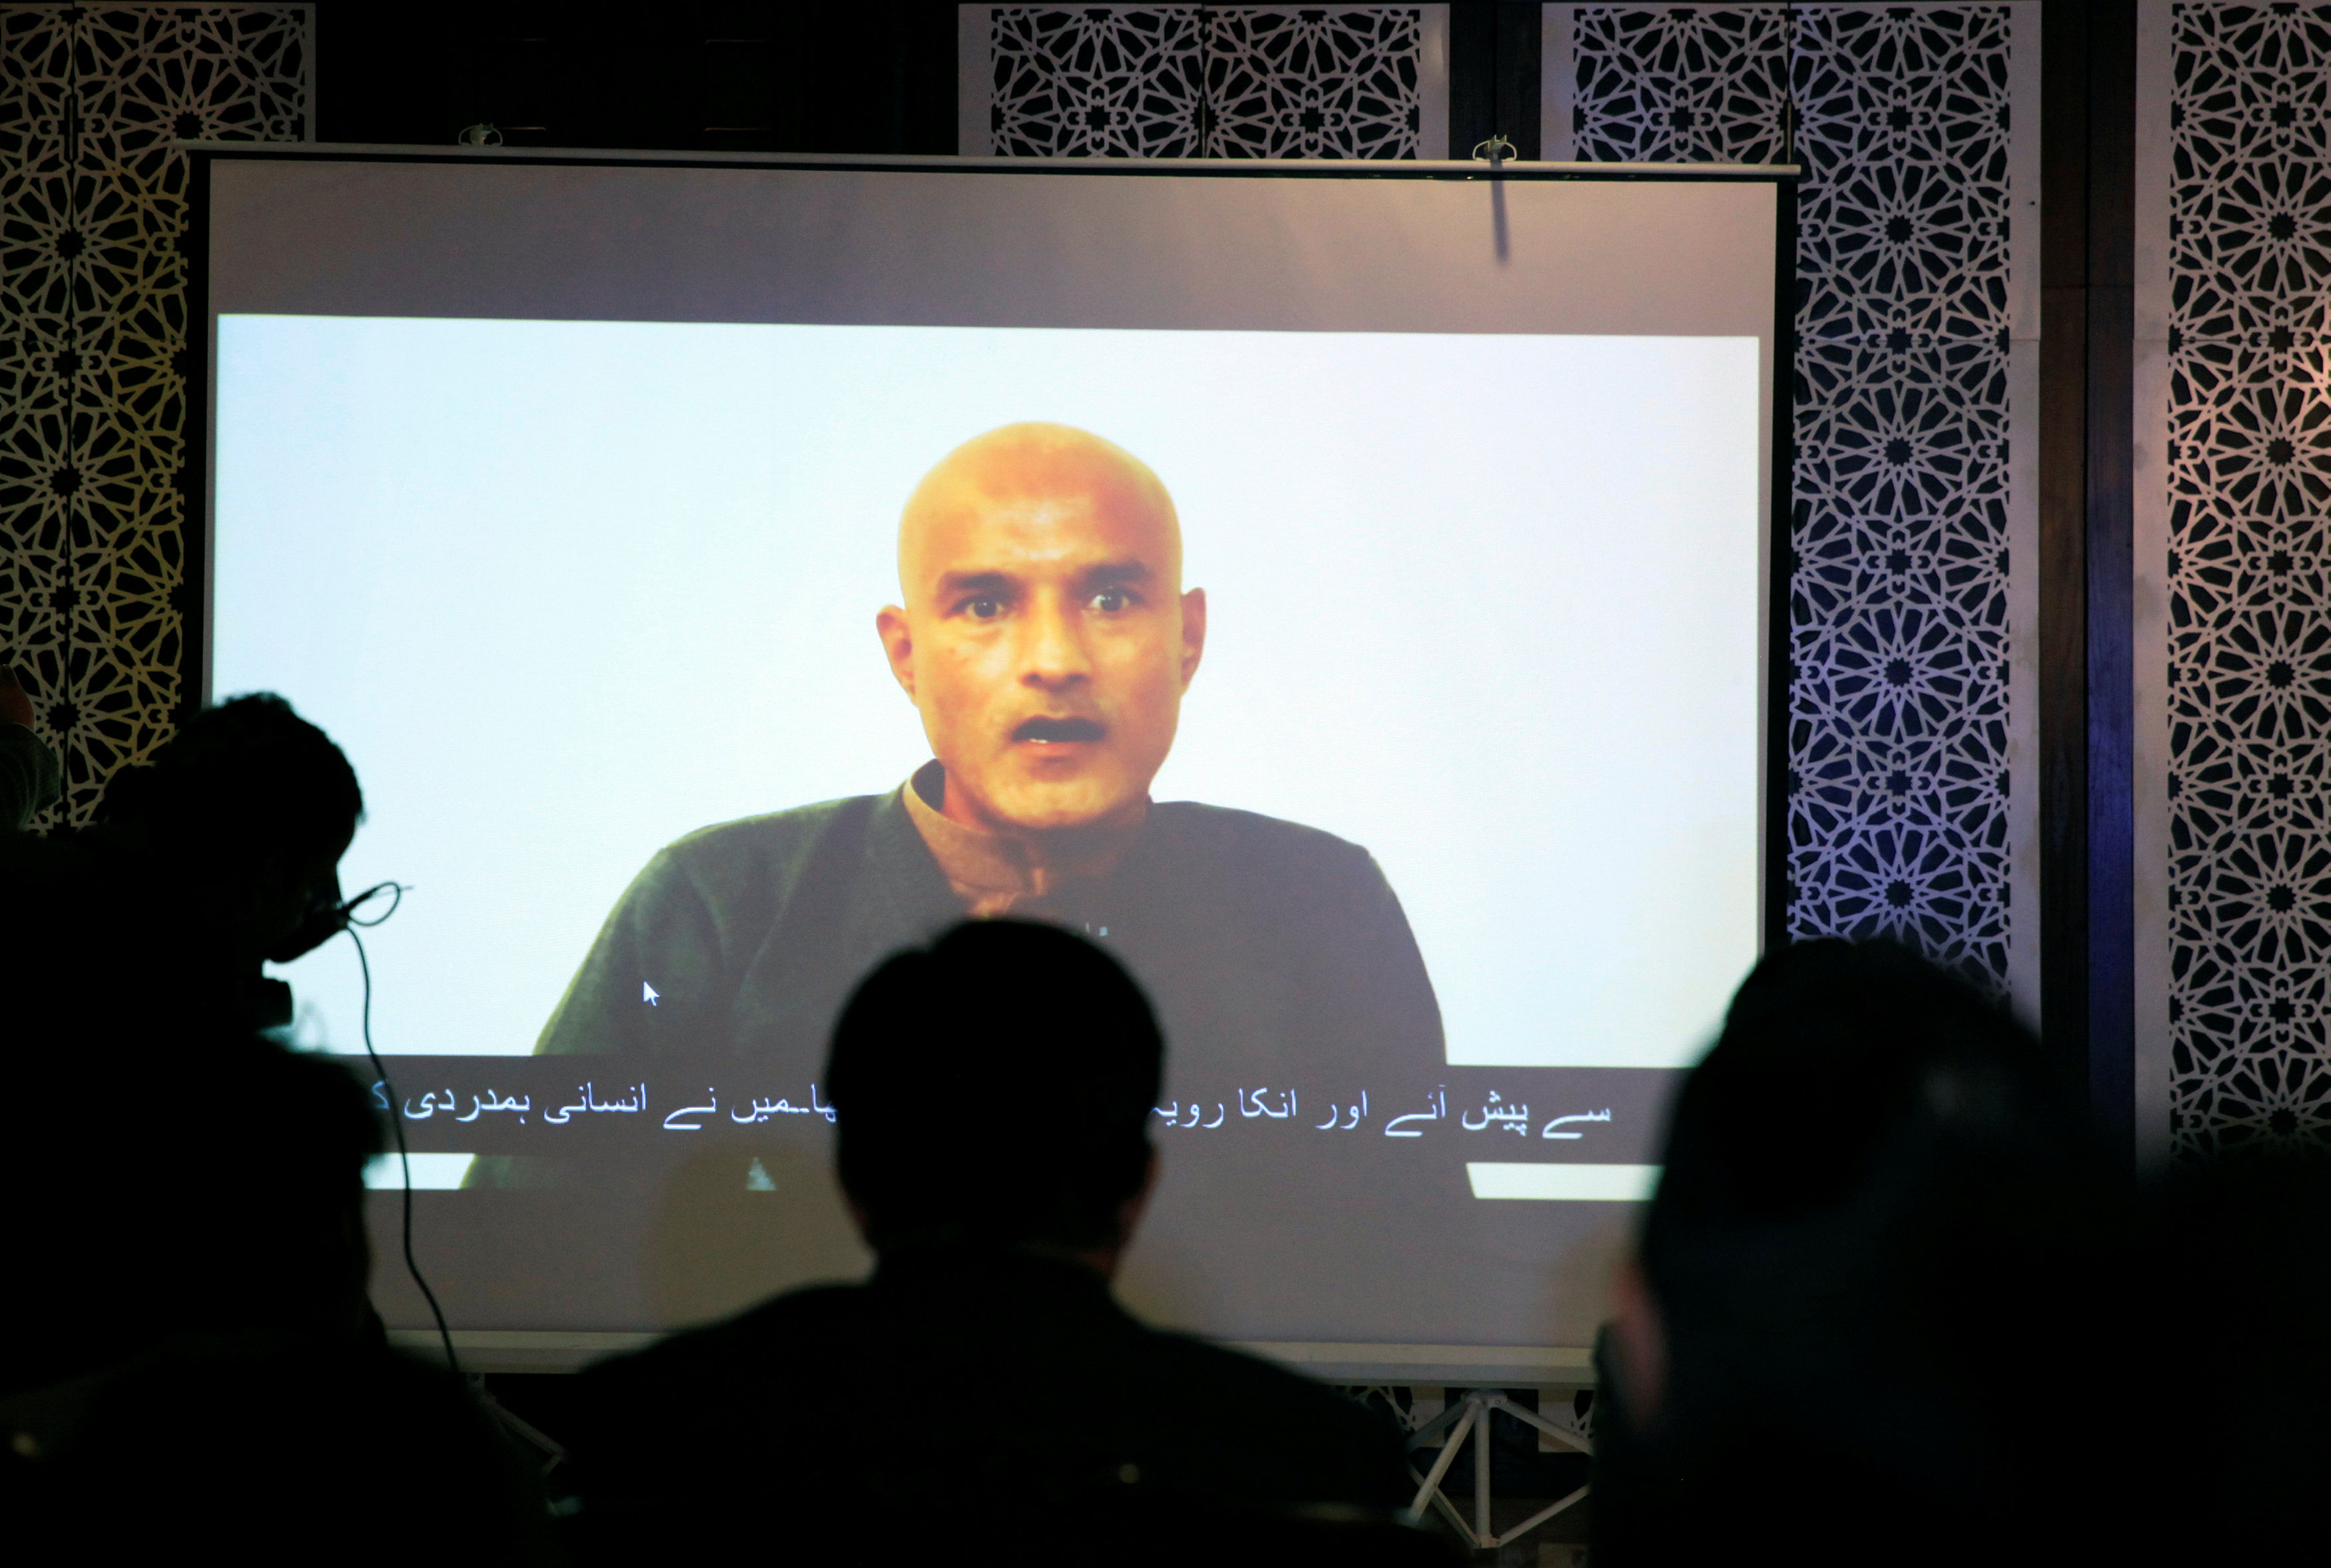 Former Indian navy officer Kulbhushan Sudhir Jadhav is seen on a screen during a news conference at the Ministry of Foreign Affairs in Islamabad, Pakistan December 25, 2017. Credit: REUTERS